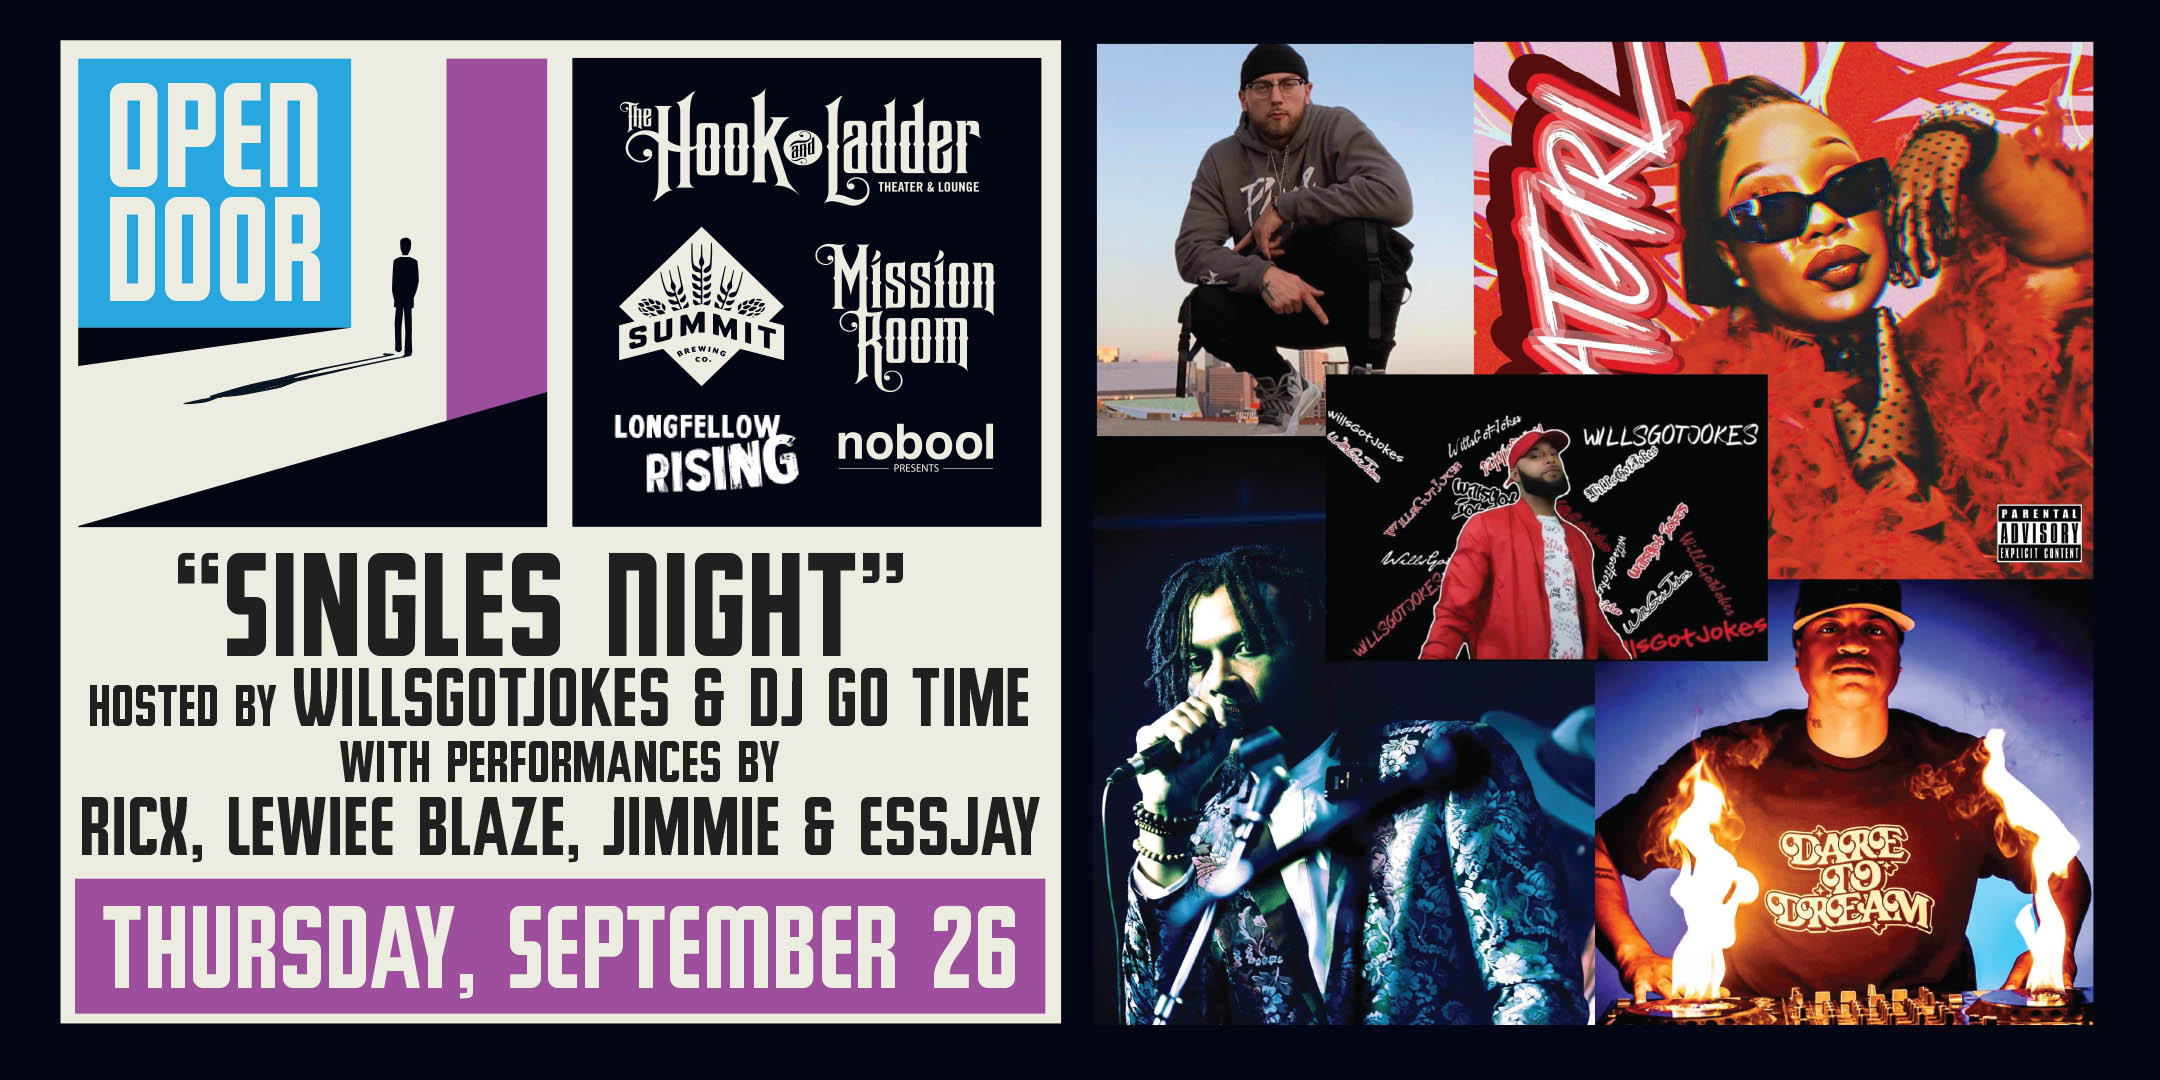 ummit Brewing, Longfellow Rising, & By Design Presents Open Door Series “Singles Night” hosted by WillsGotJokes & DJ Go Time with performances by RicX, Lewie Blaze, Jimmie & Essjay Thursday, September 26 at The Hook and Ladder's Mission Room Doors 5pm :: Music 7-10pm :: 21+ FREE $5.01 Online Advance Donation (Includes a Summit Beer & 21+ Wristband*) $10 Donation at The Door (Includes a Summit Beer & 21+ Wristband*)